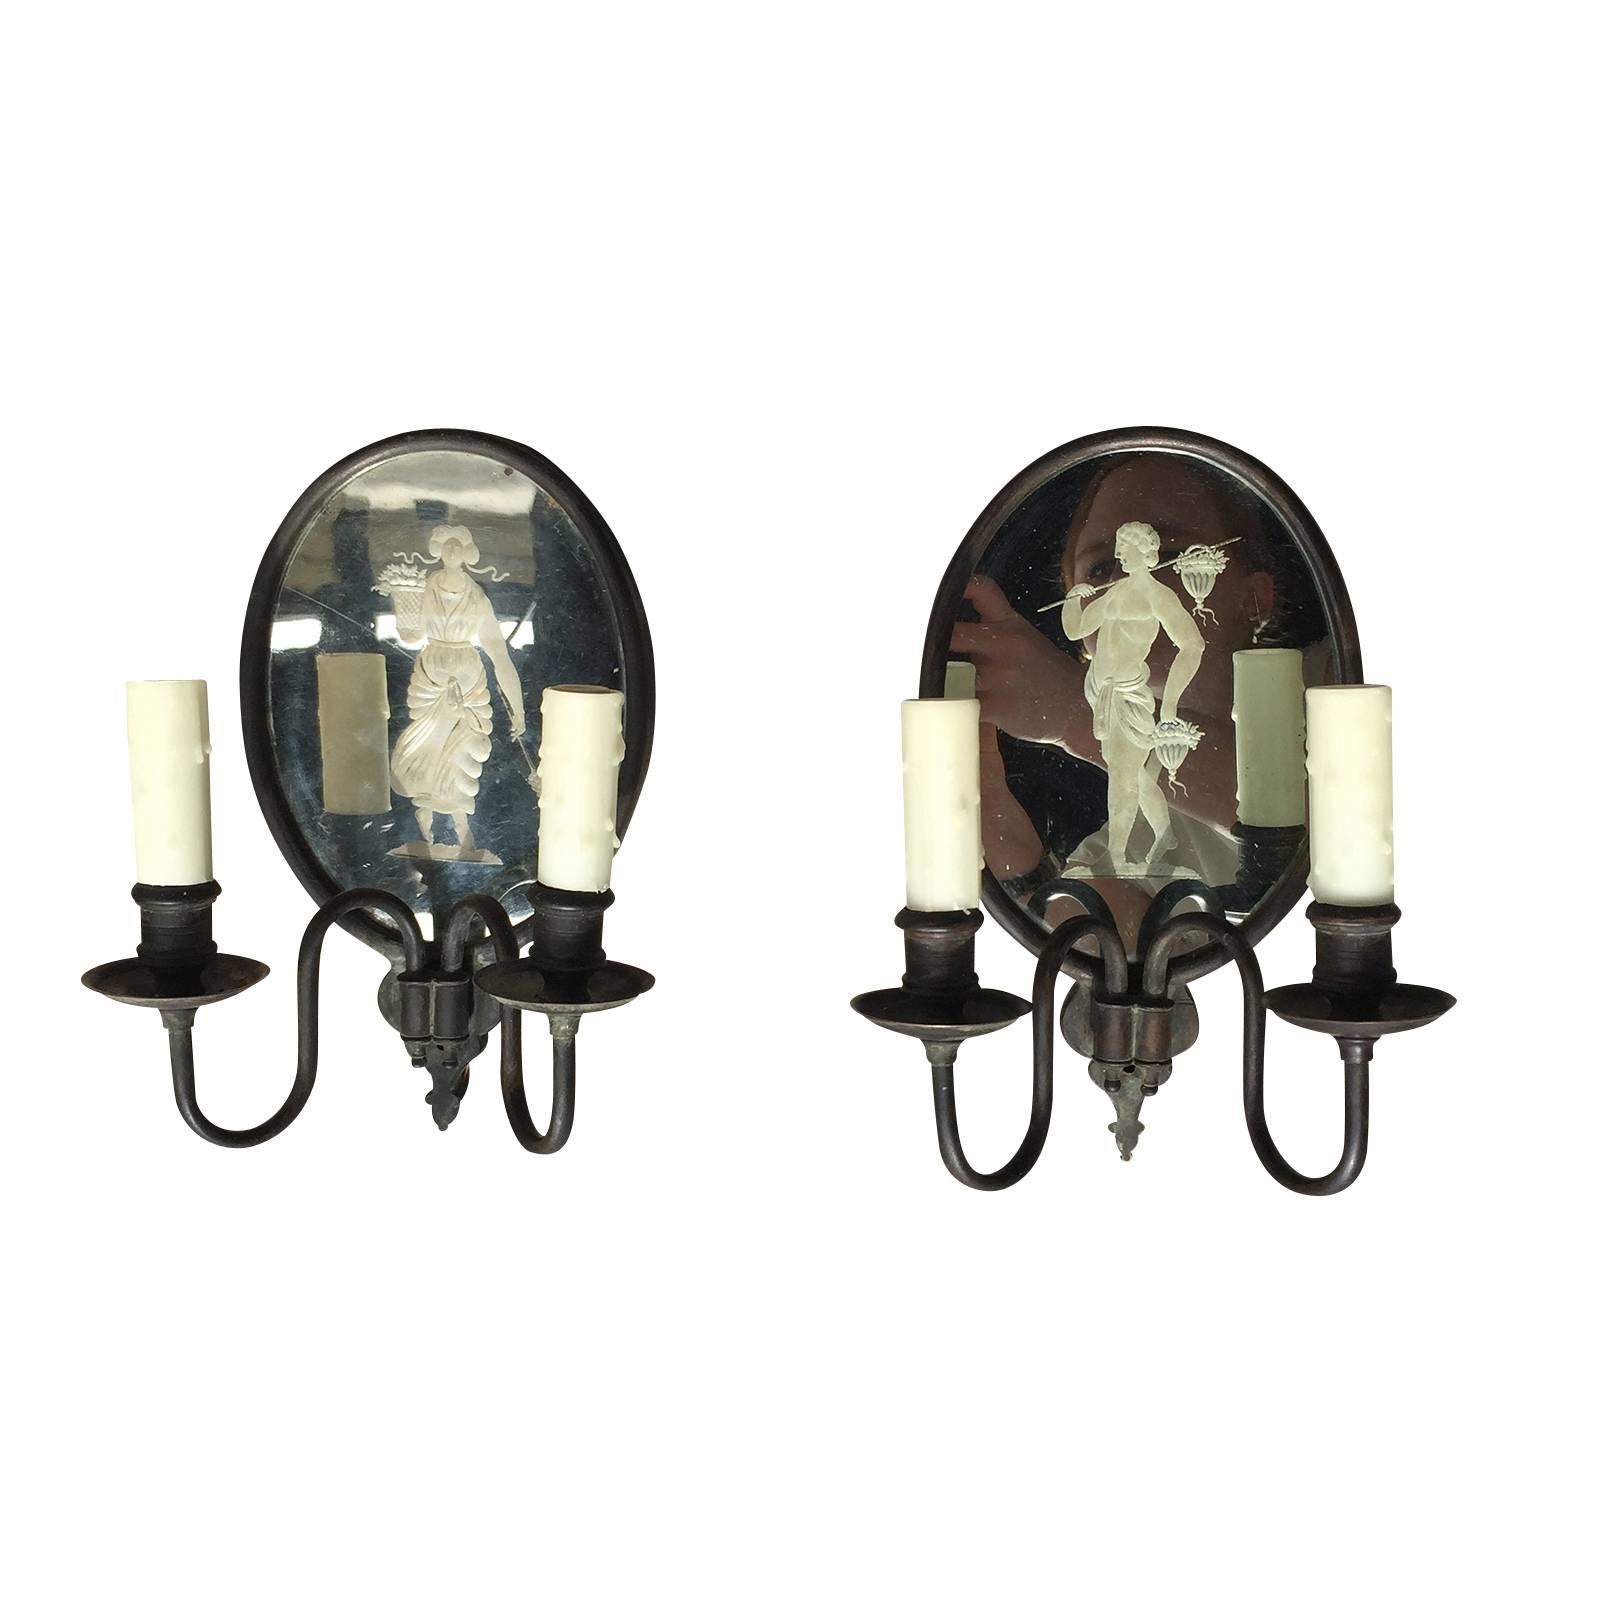 Pair of charming early 20th century two-arm mirrored oval sconces with etchings,
back plate. measures : 6.25